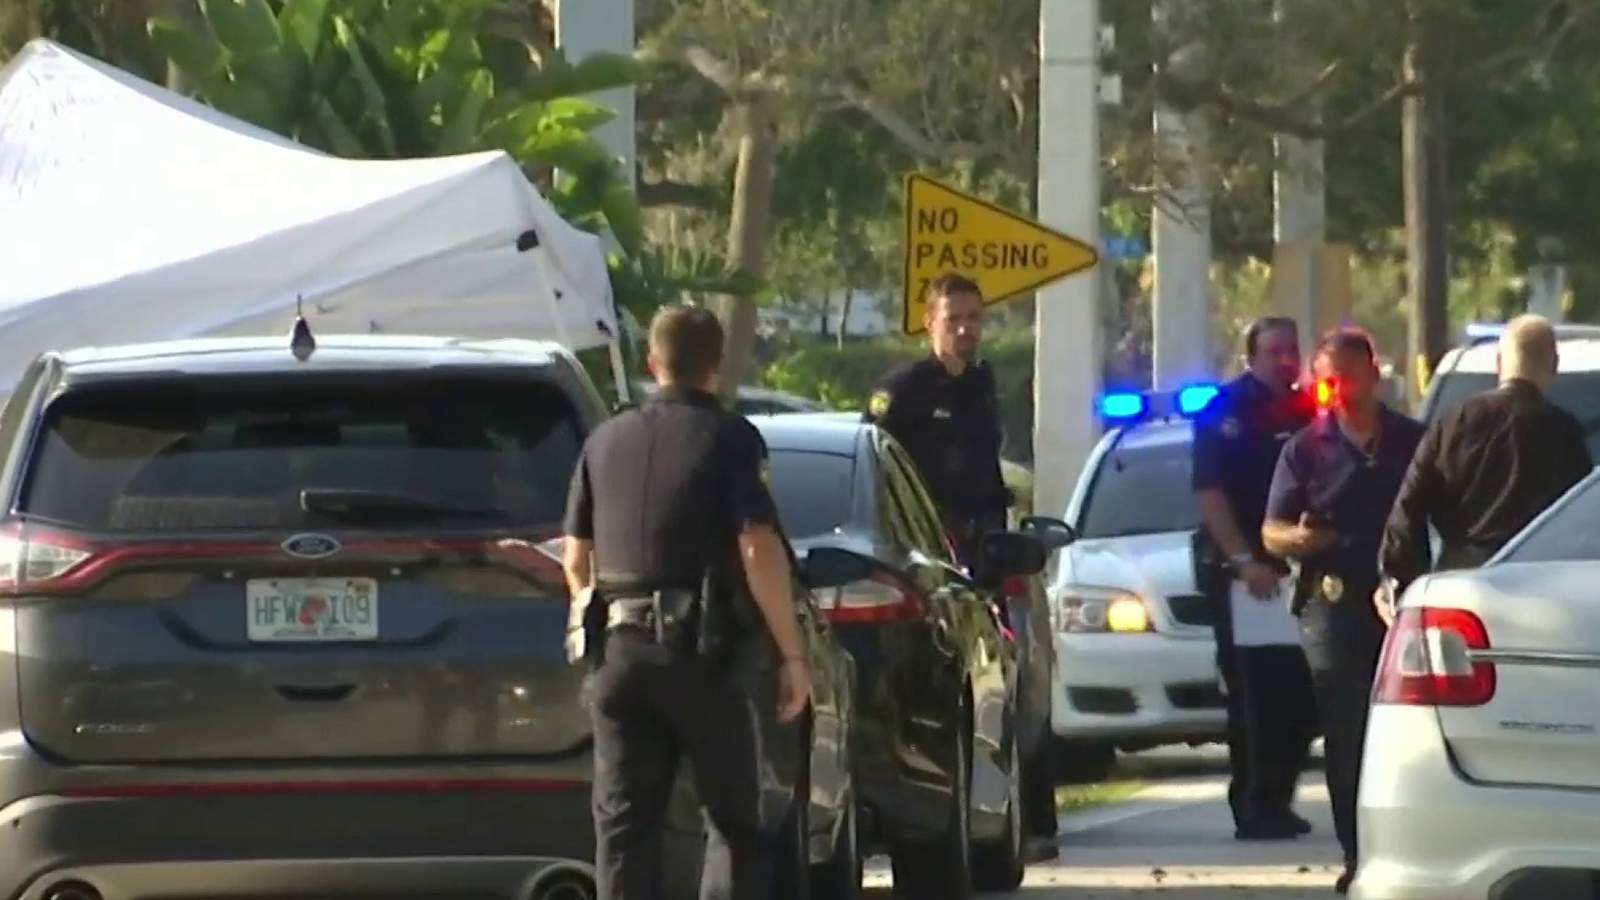 Ormond Beach police responding to domestic dispute fatally shoot couple, authorities say